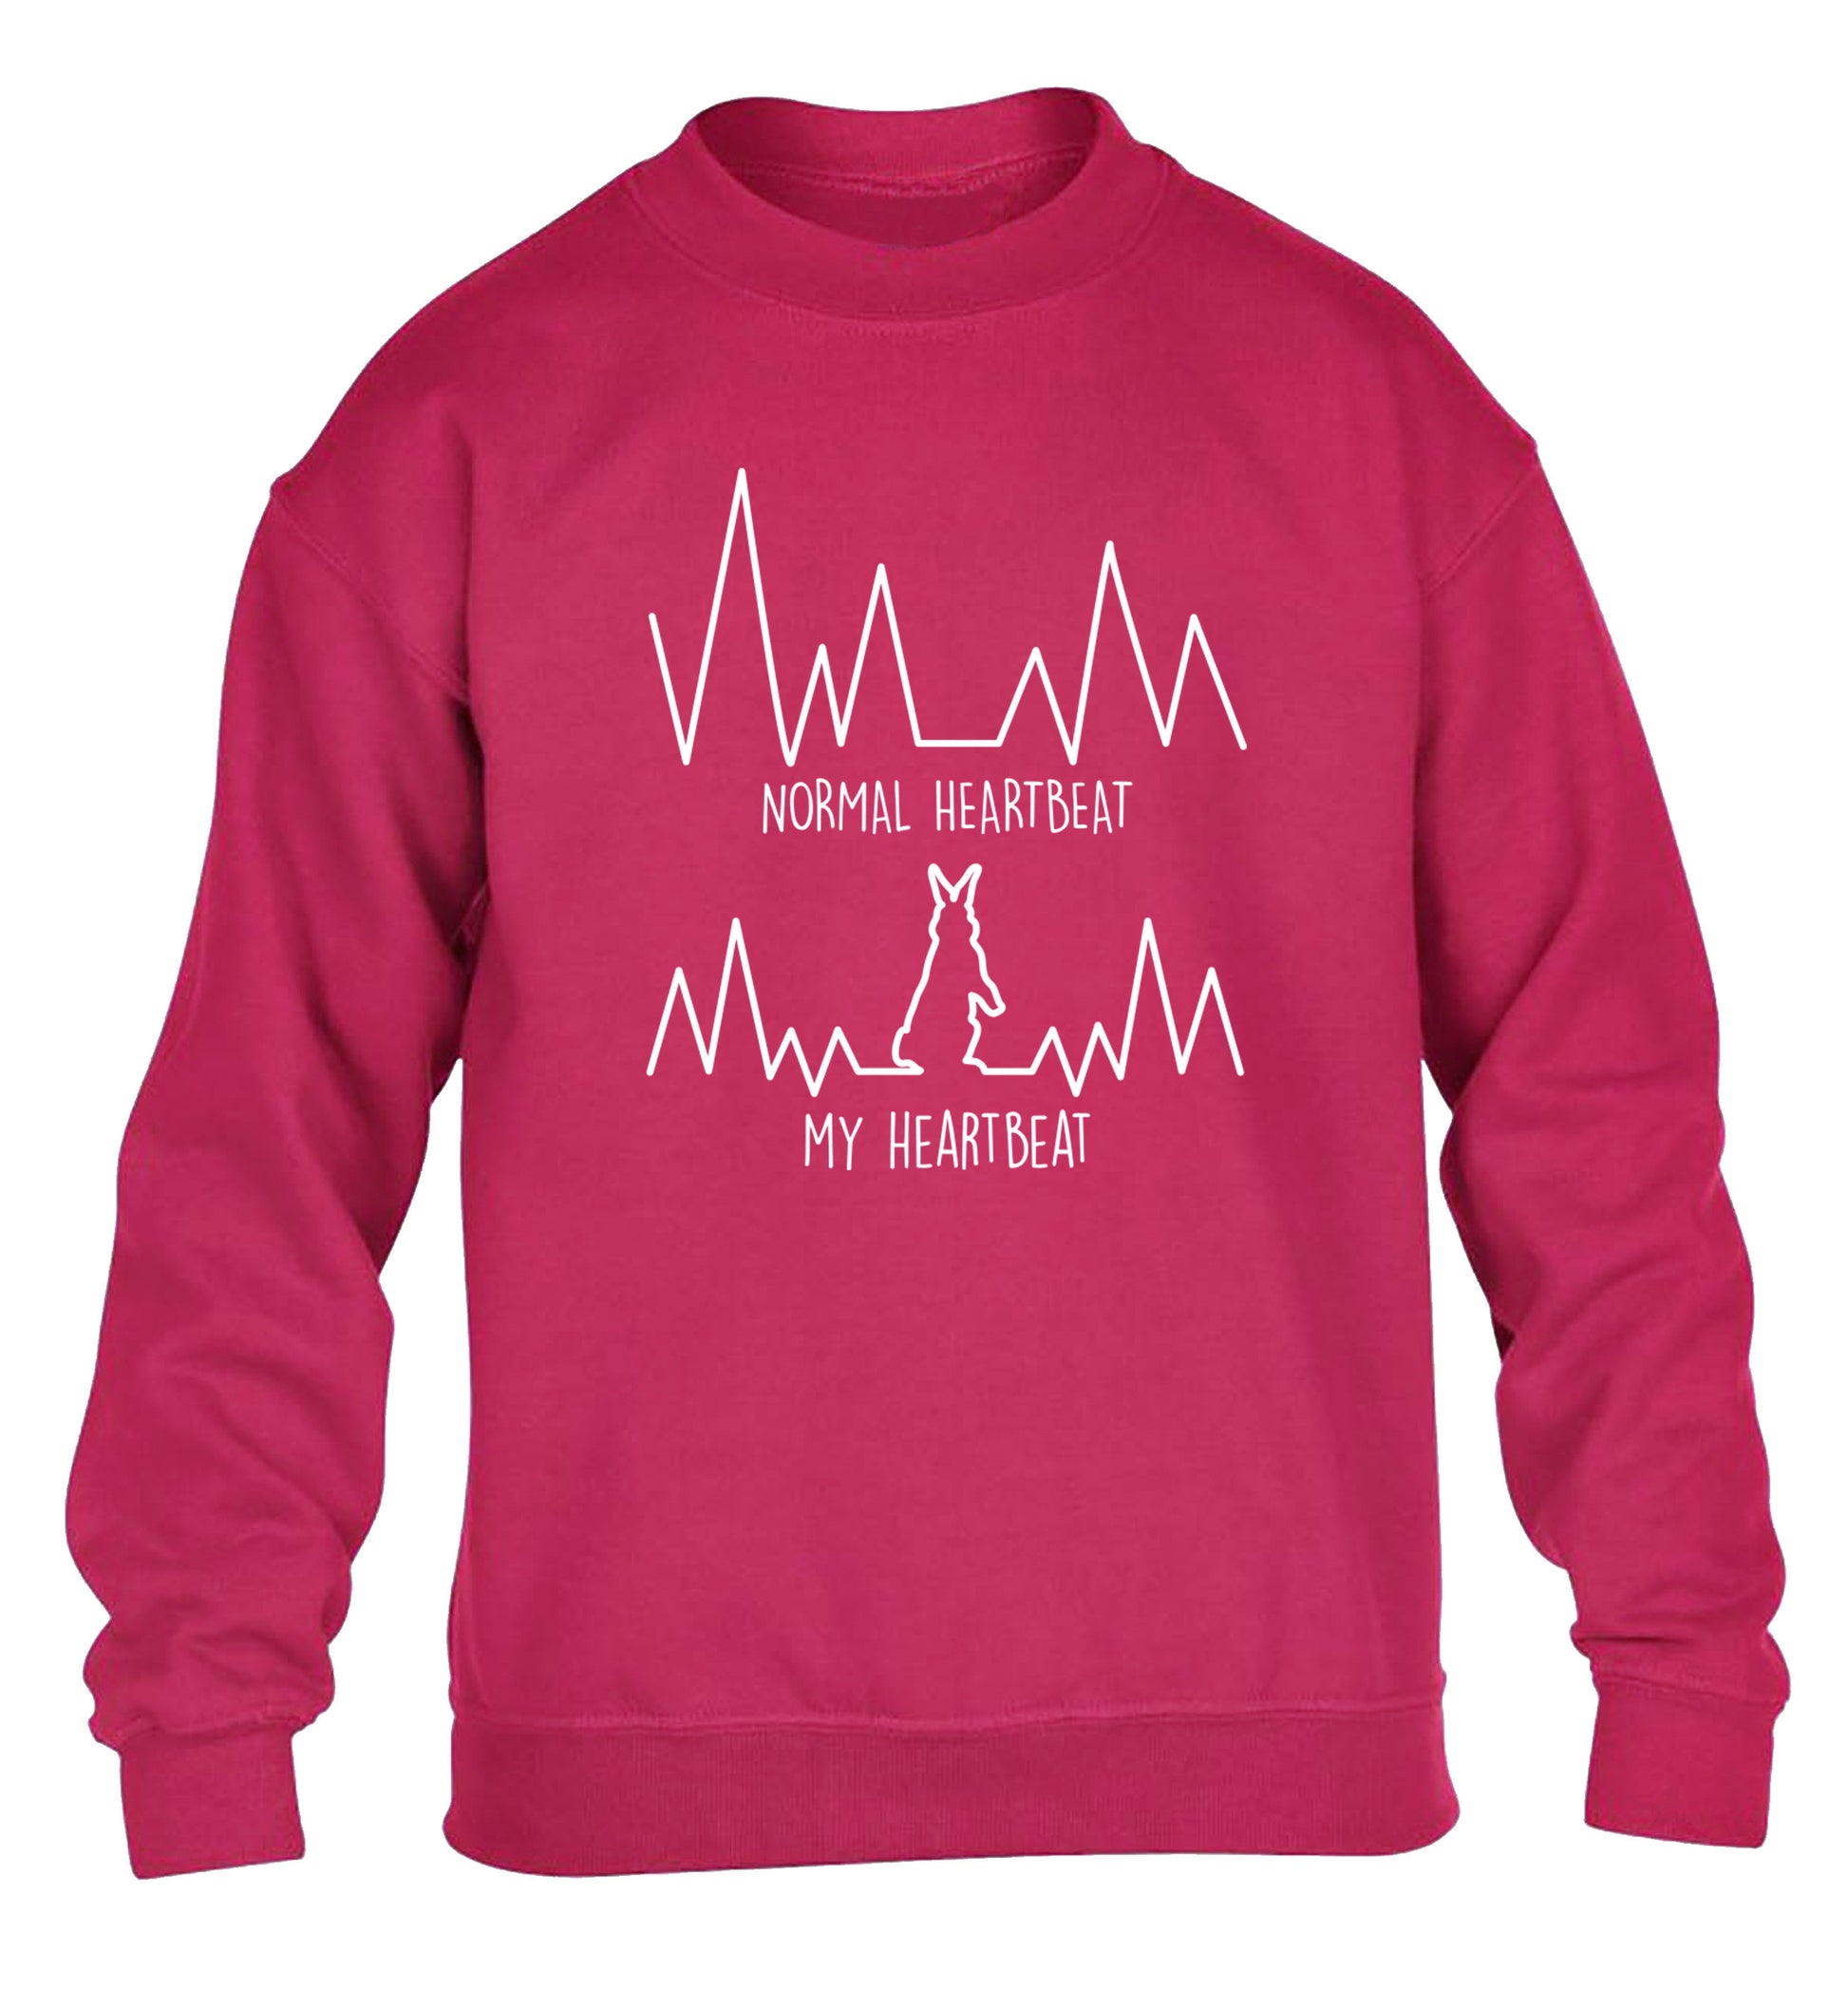 Normal heartbeat, my heartbeat rabbit lover children's pink  sweater 12-14 Years